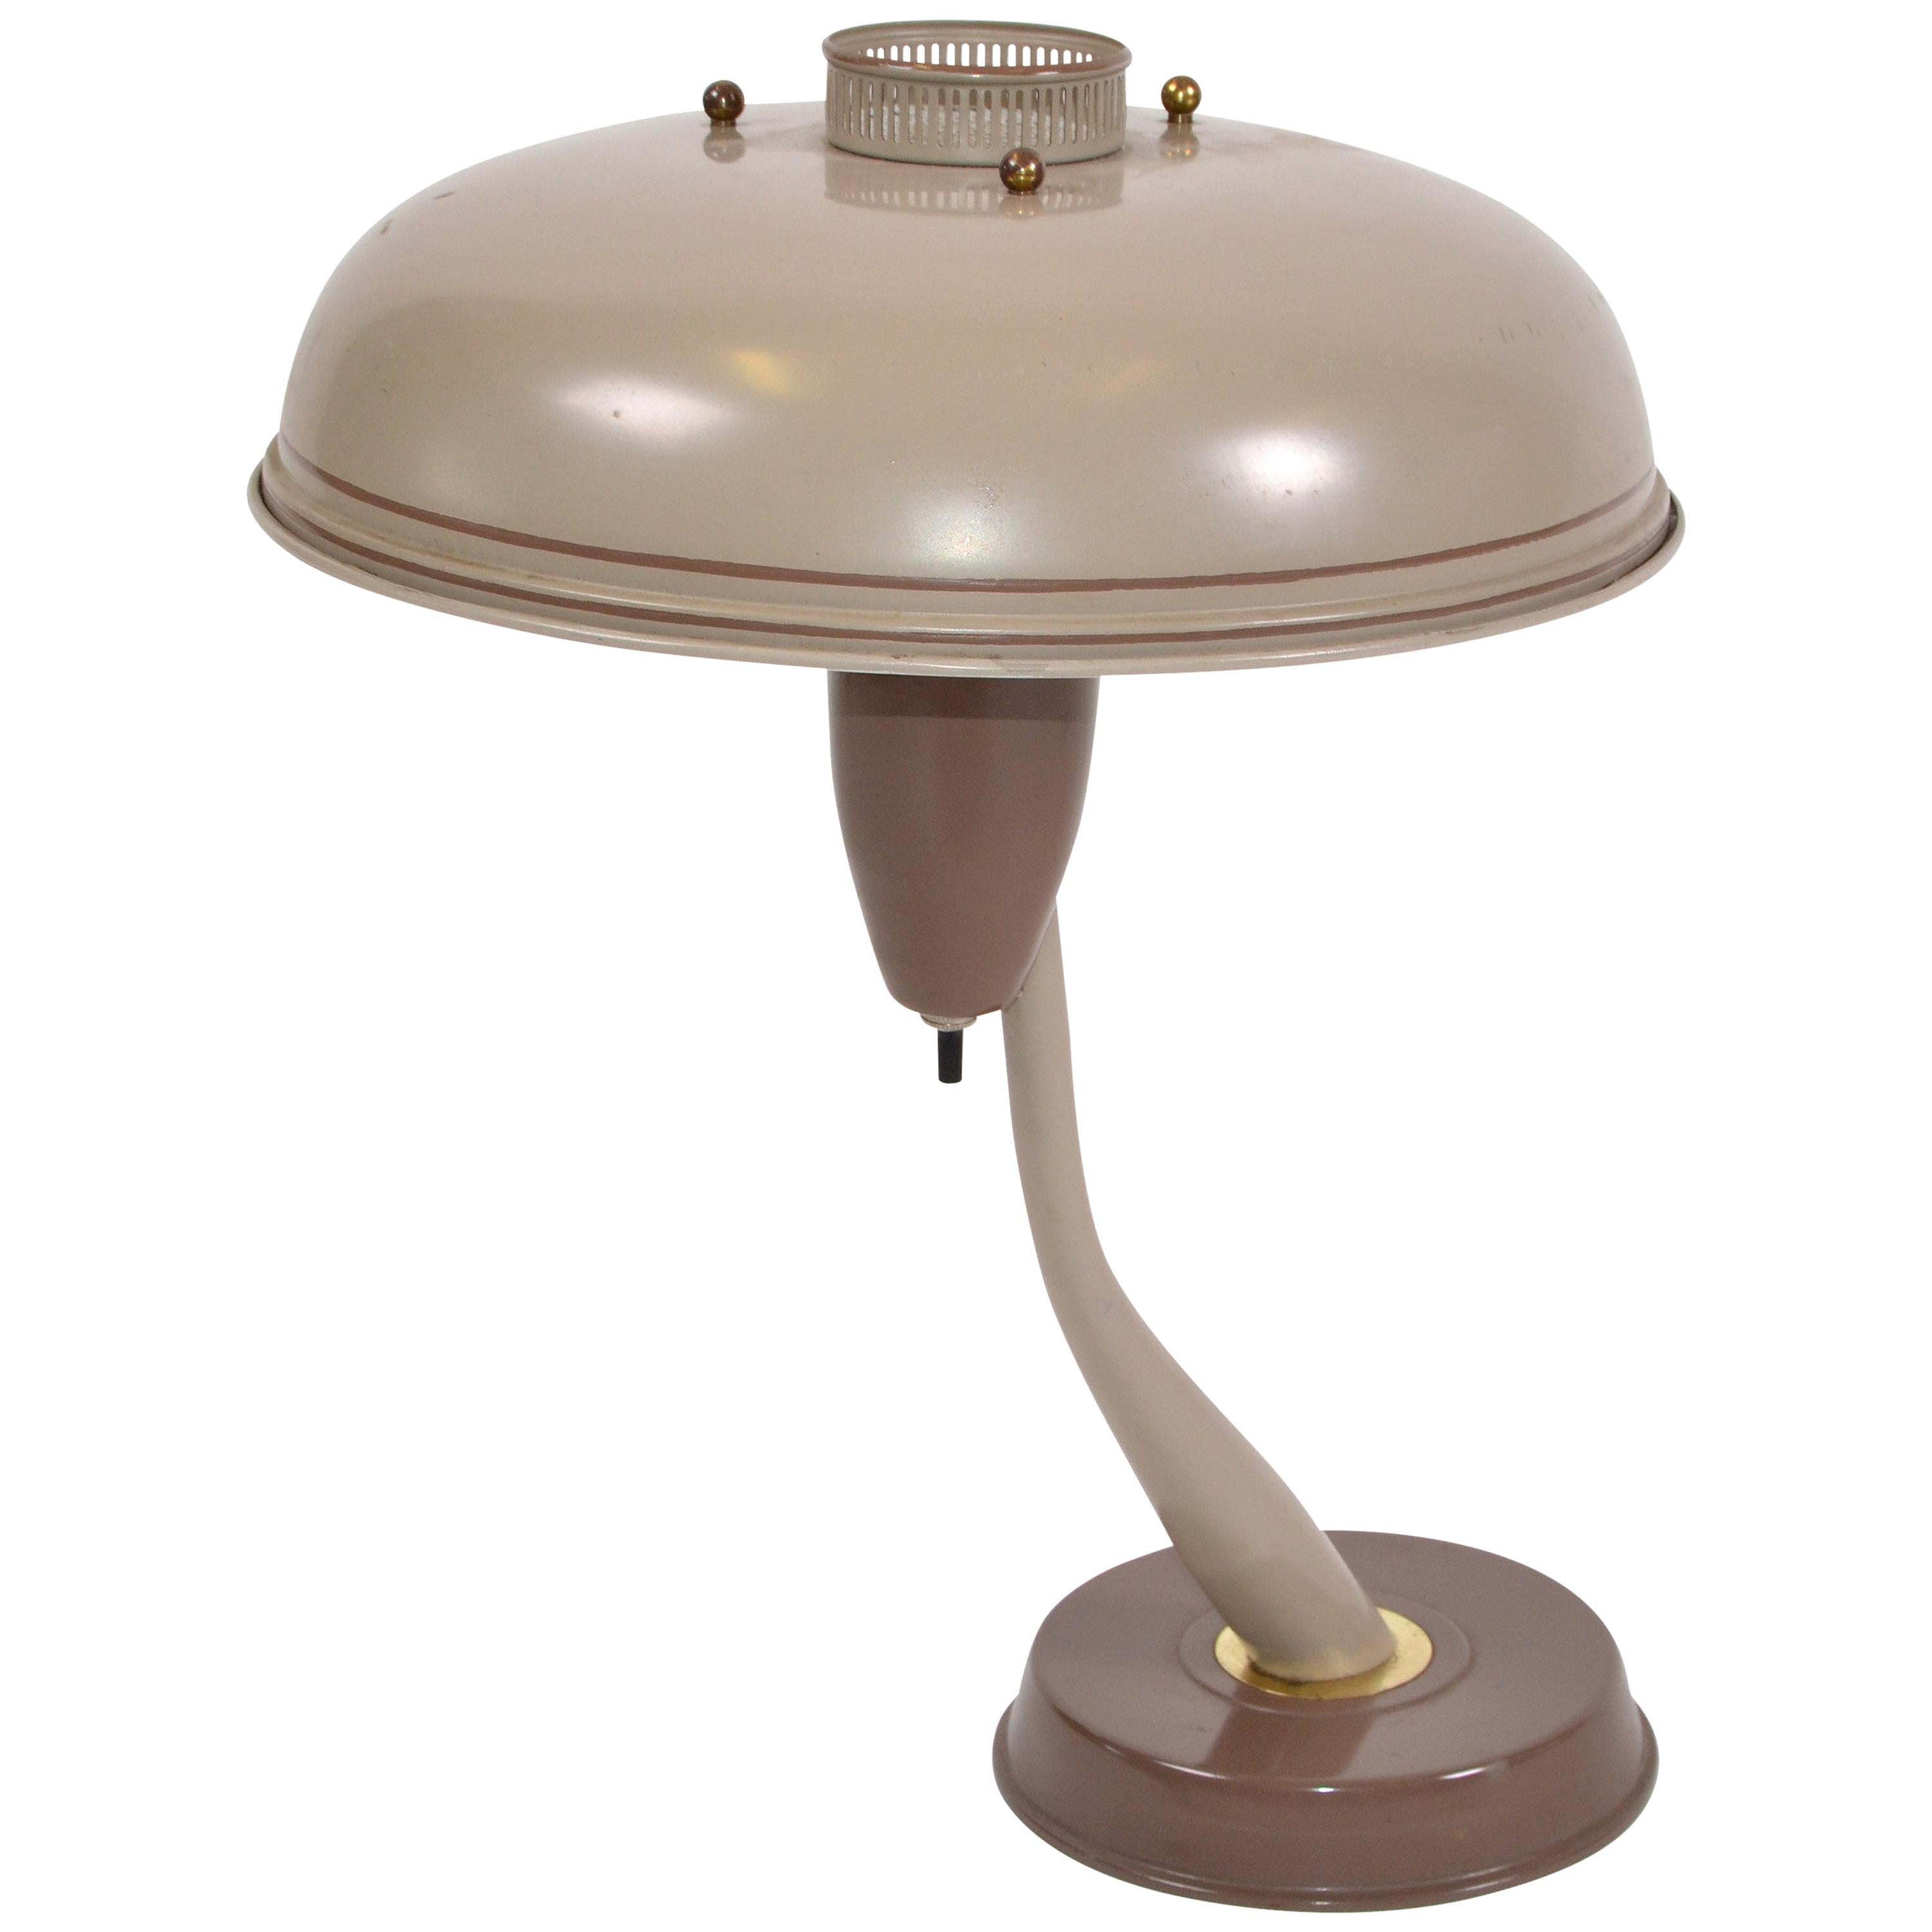  1950s Mid-Century Modern Space Age Brown Metal & Brass Flying Saucer Table Lamp